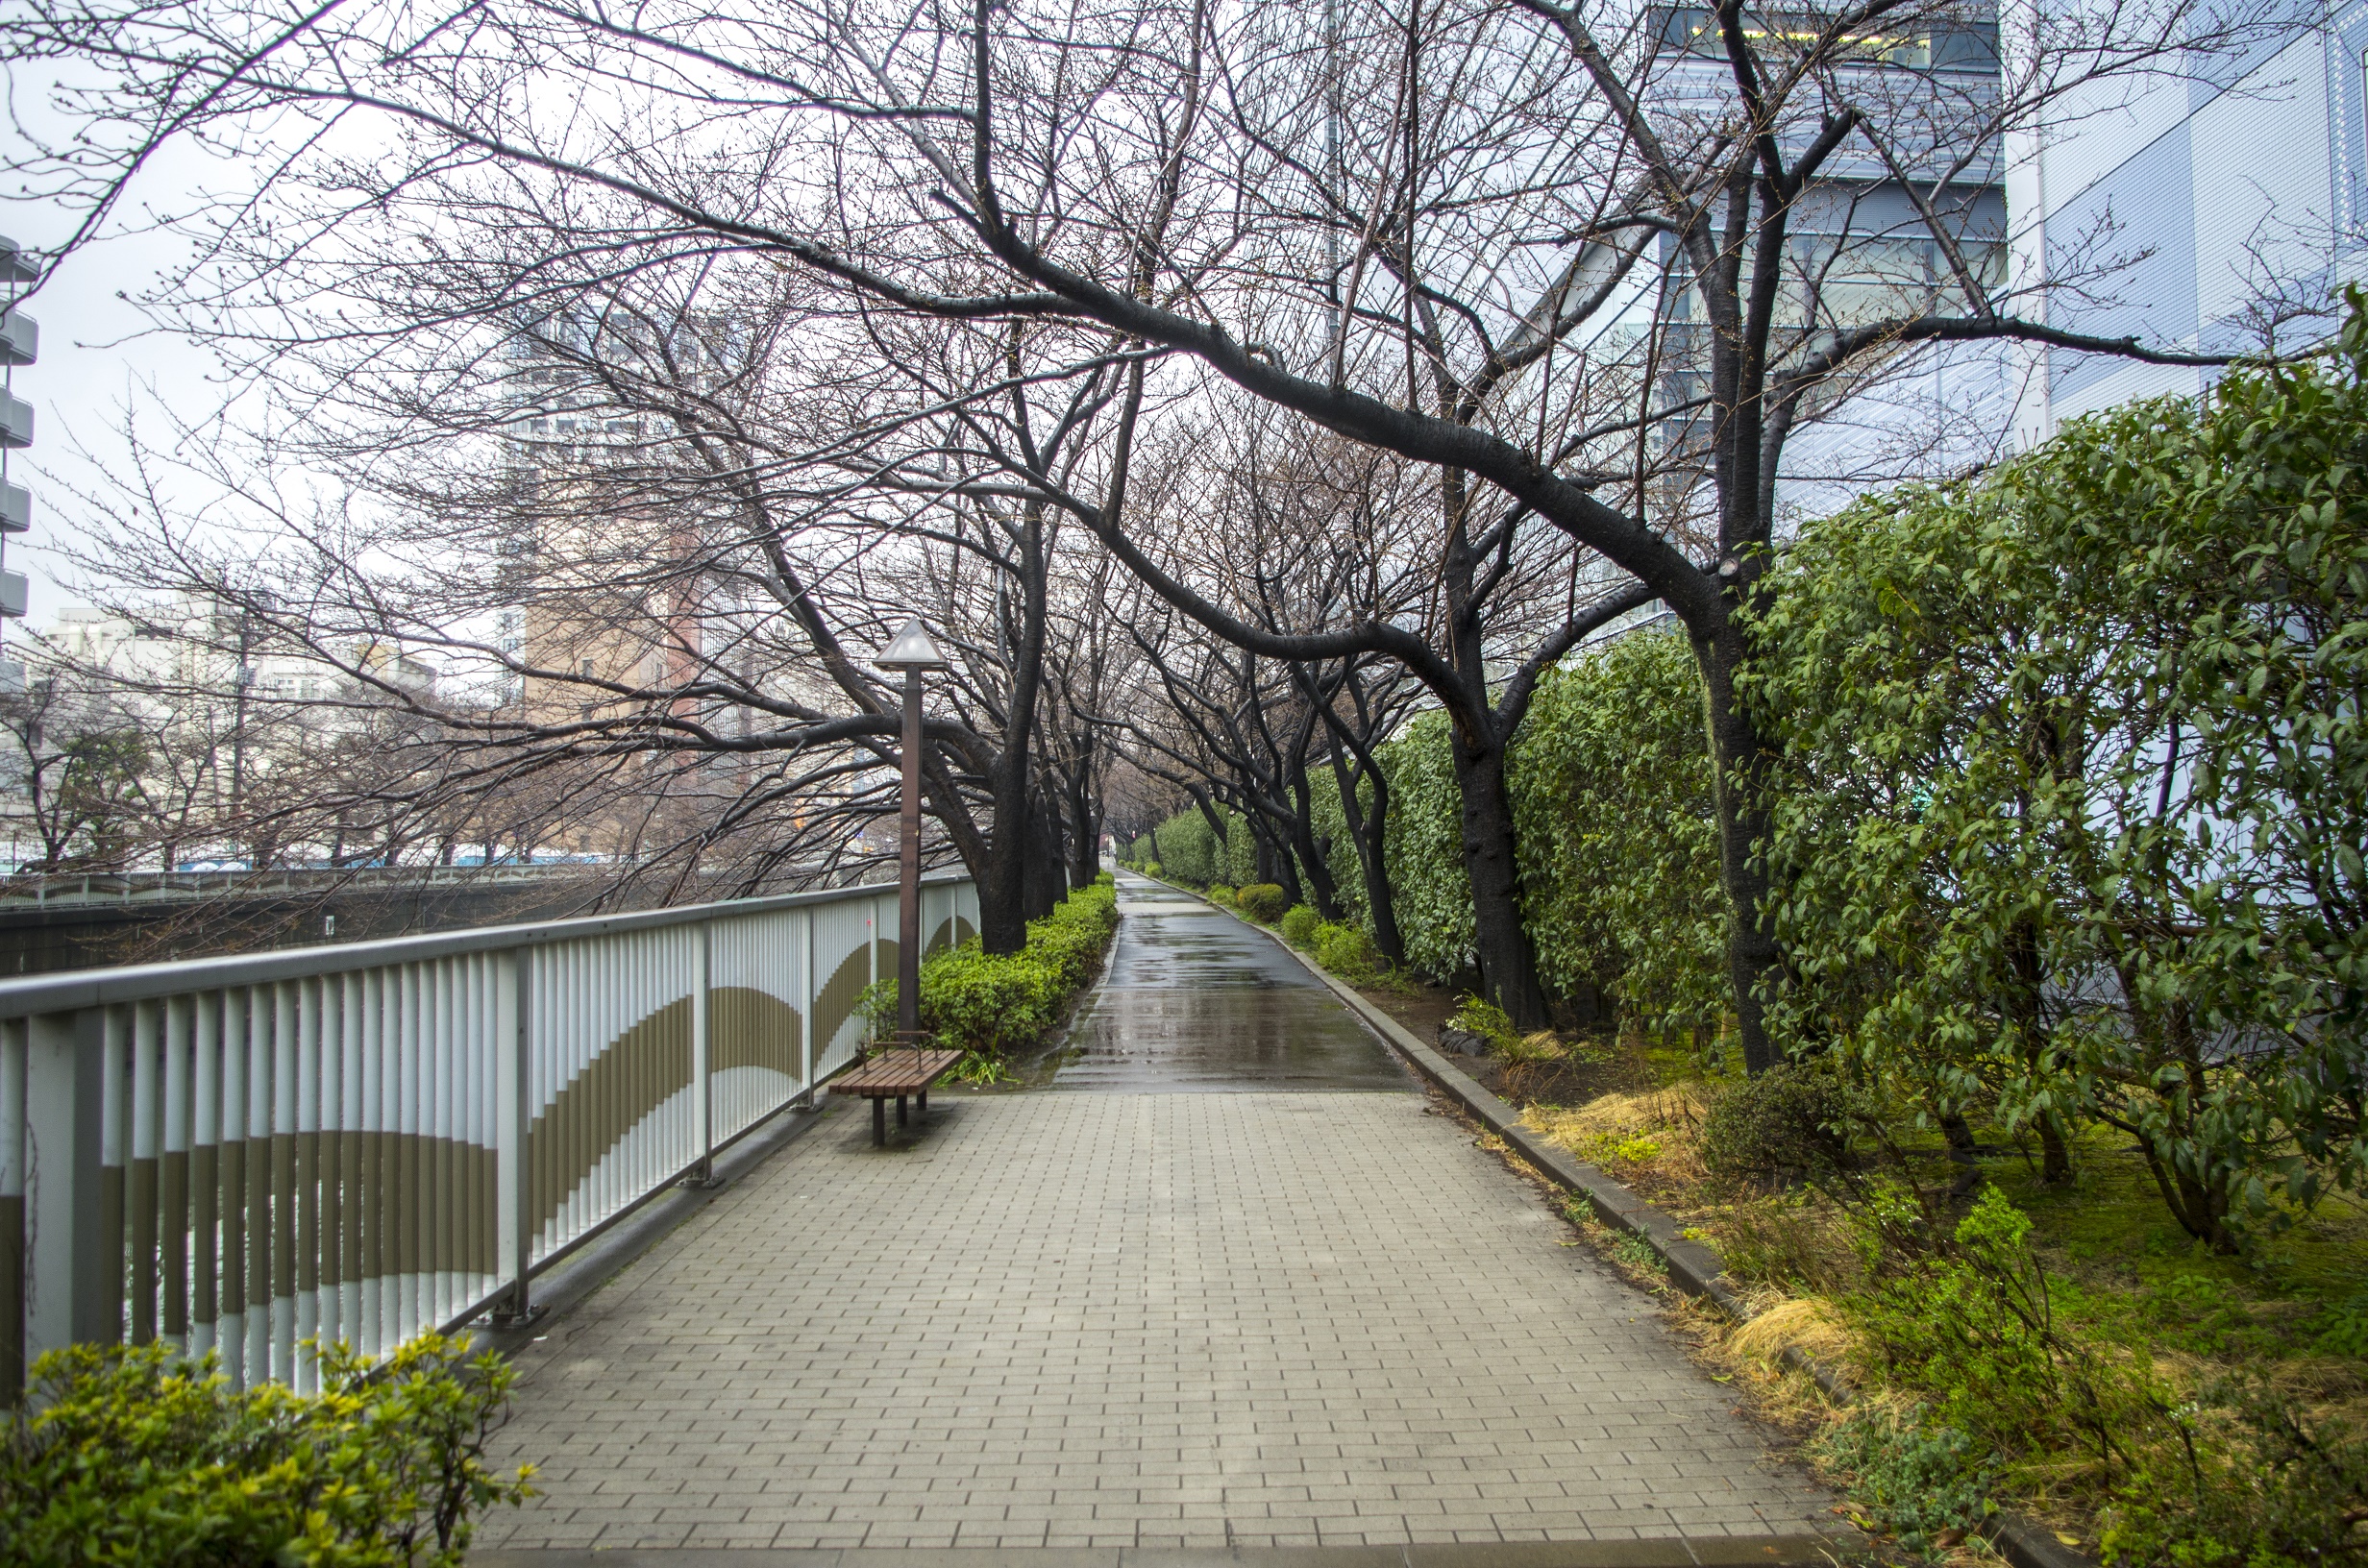 One of the Meguro river banks, you can see the sakura trees next to the sidewalk - very busy place during hanami season.